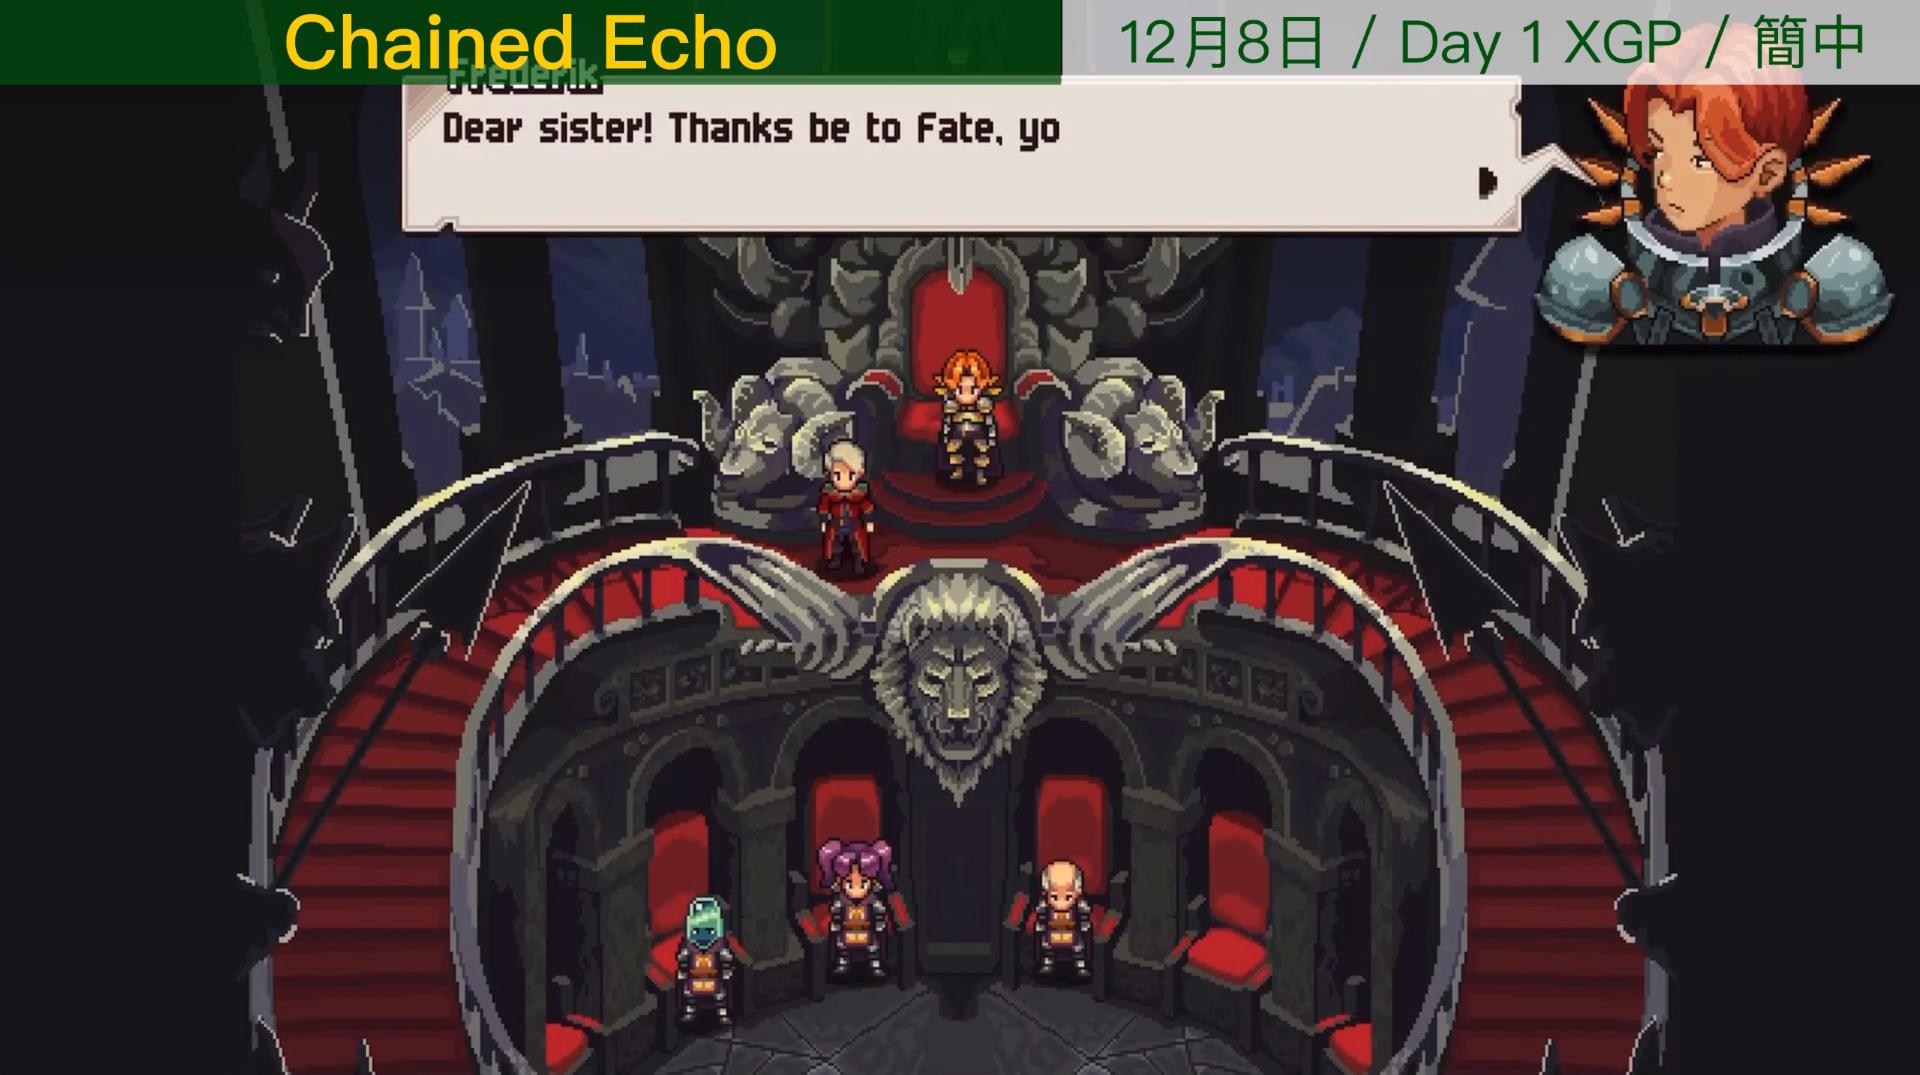 JRPG Chained Echoes coming Day One to Game Pass on December 8th - XboxEra